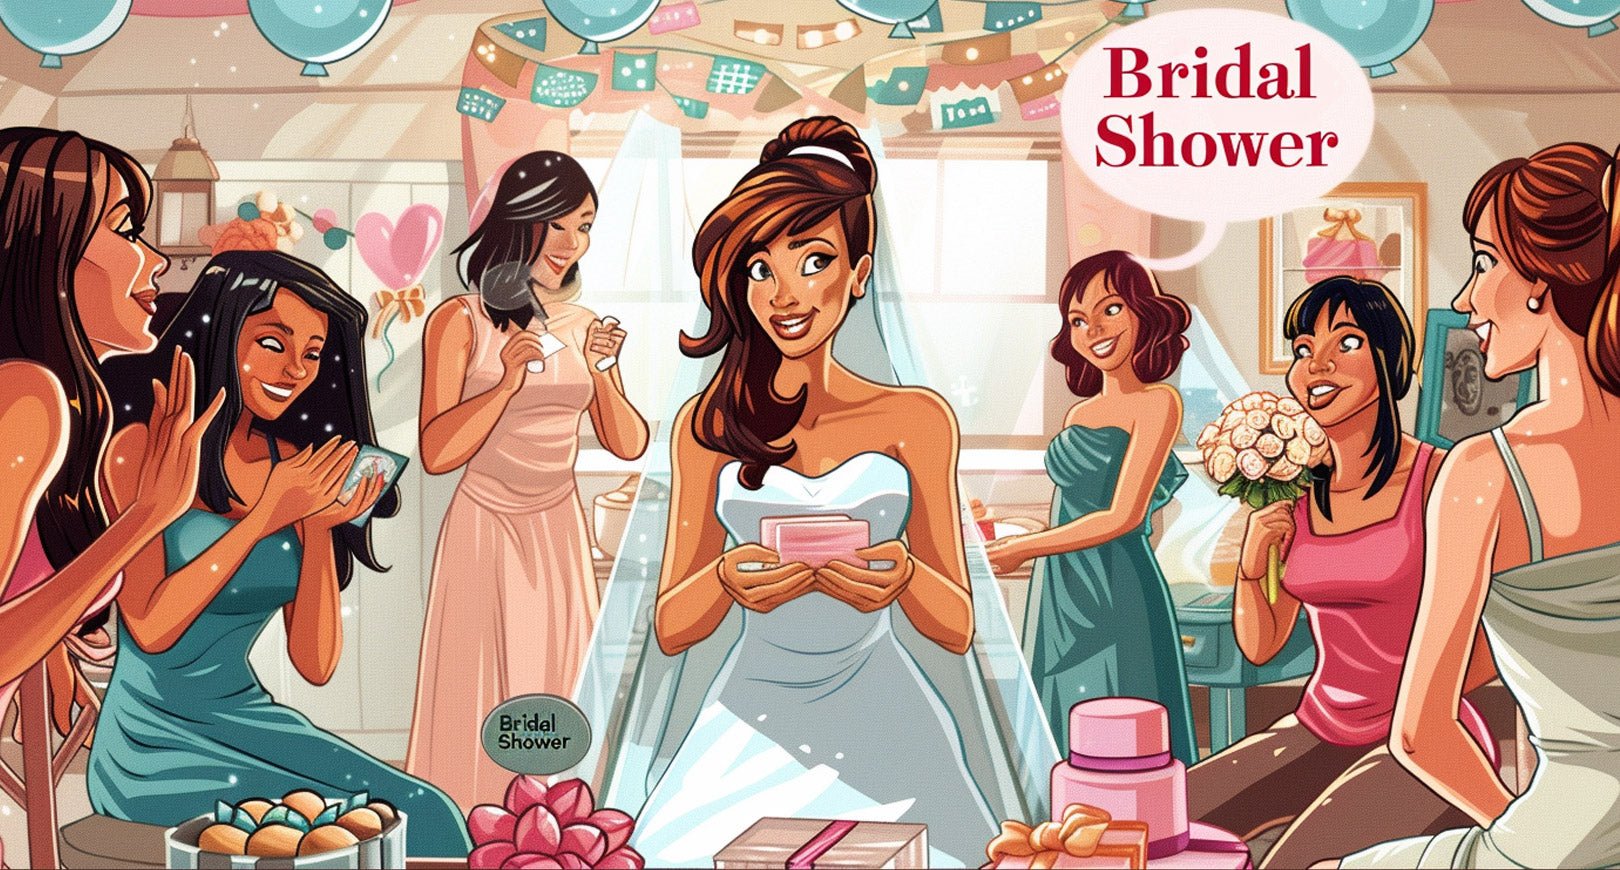 What is a Bridal Shower?